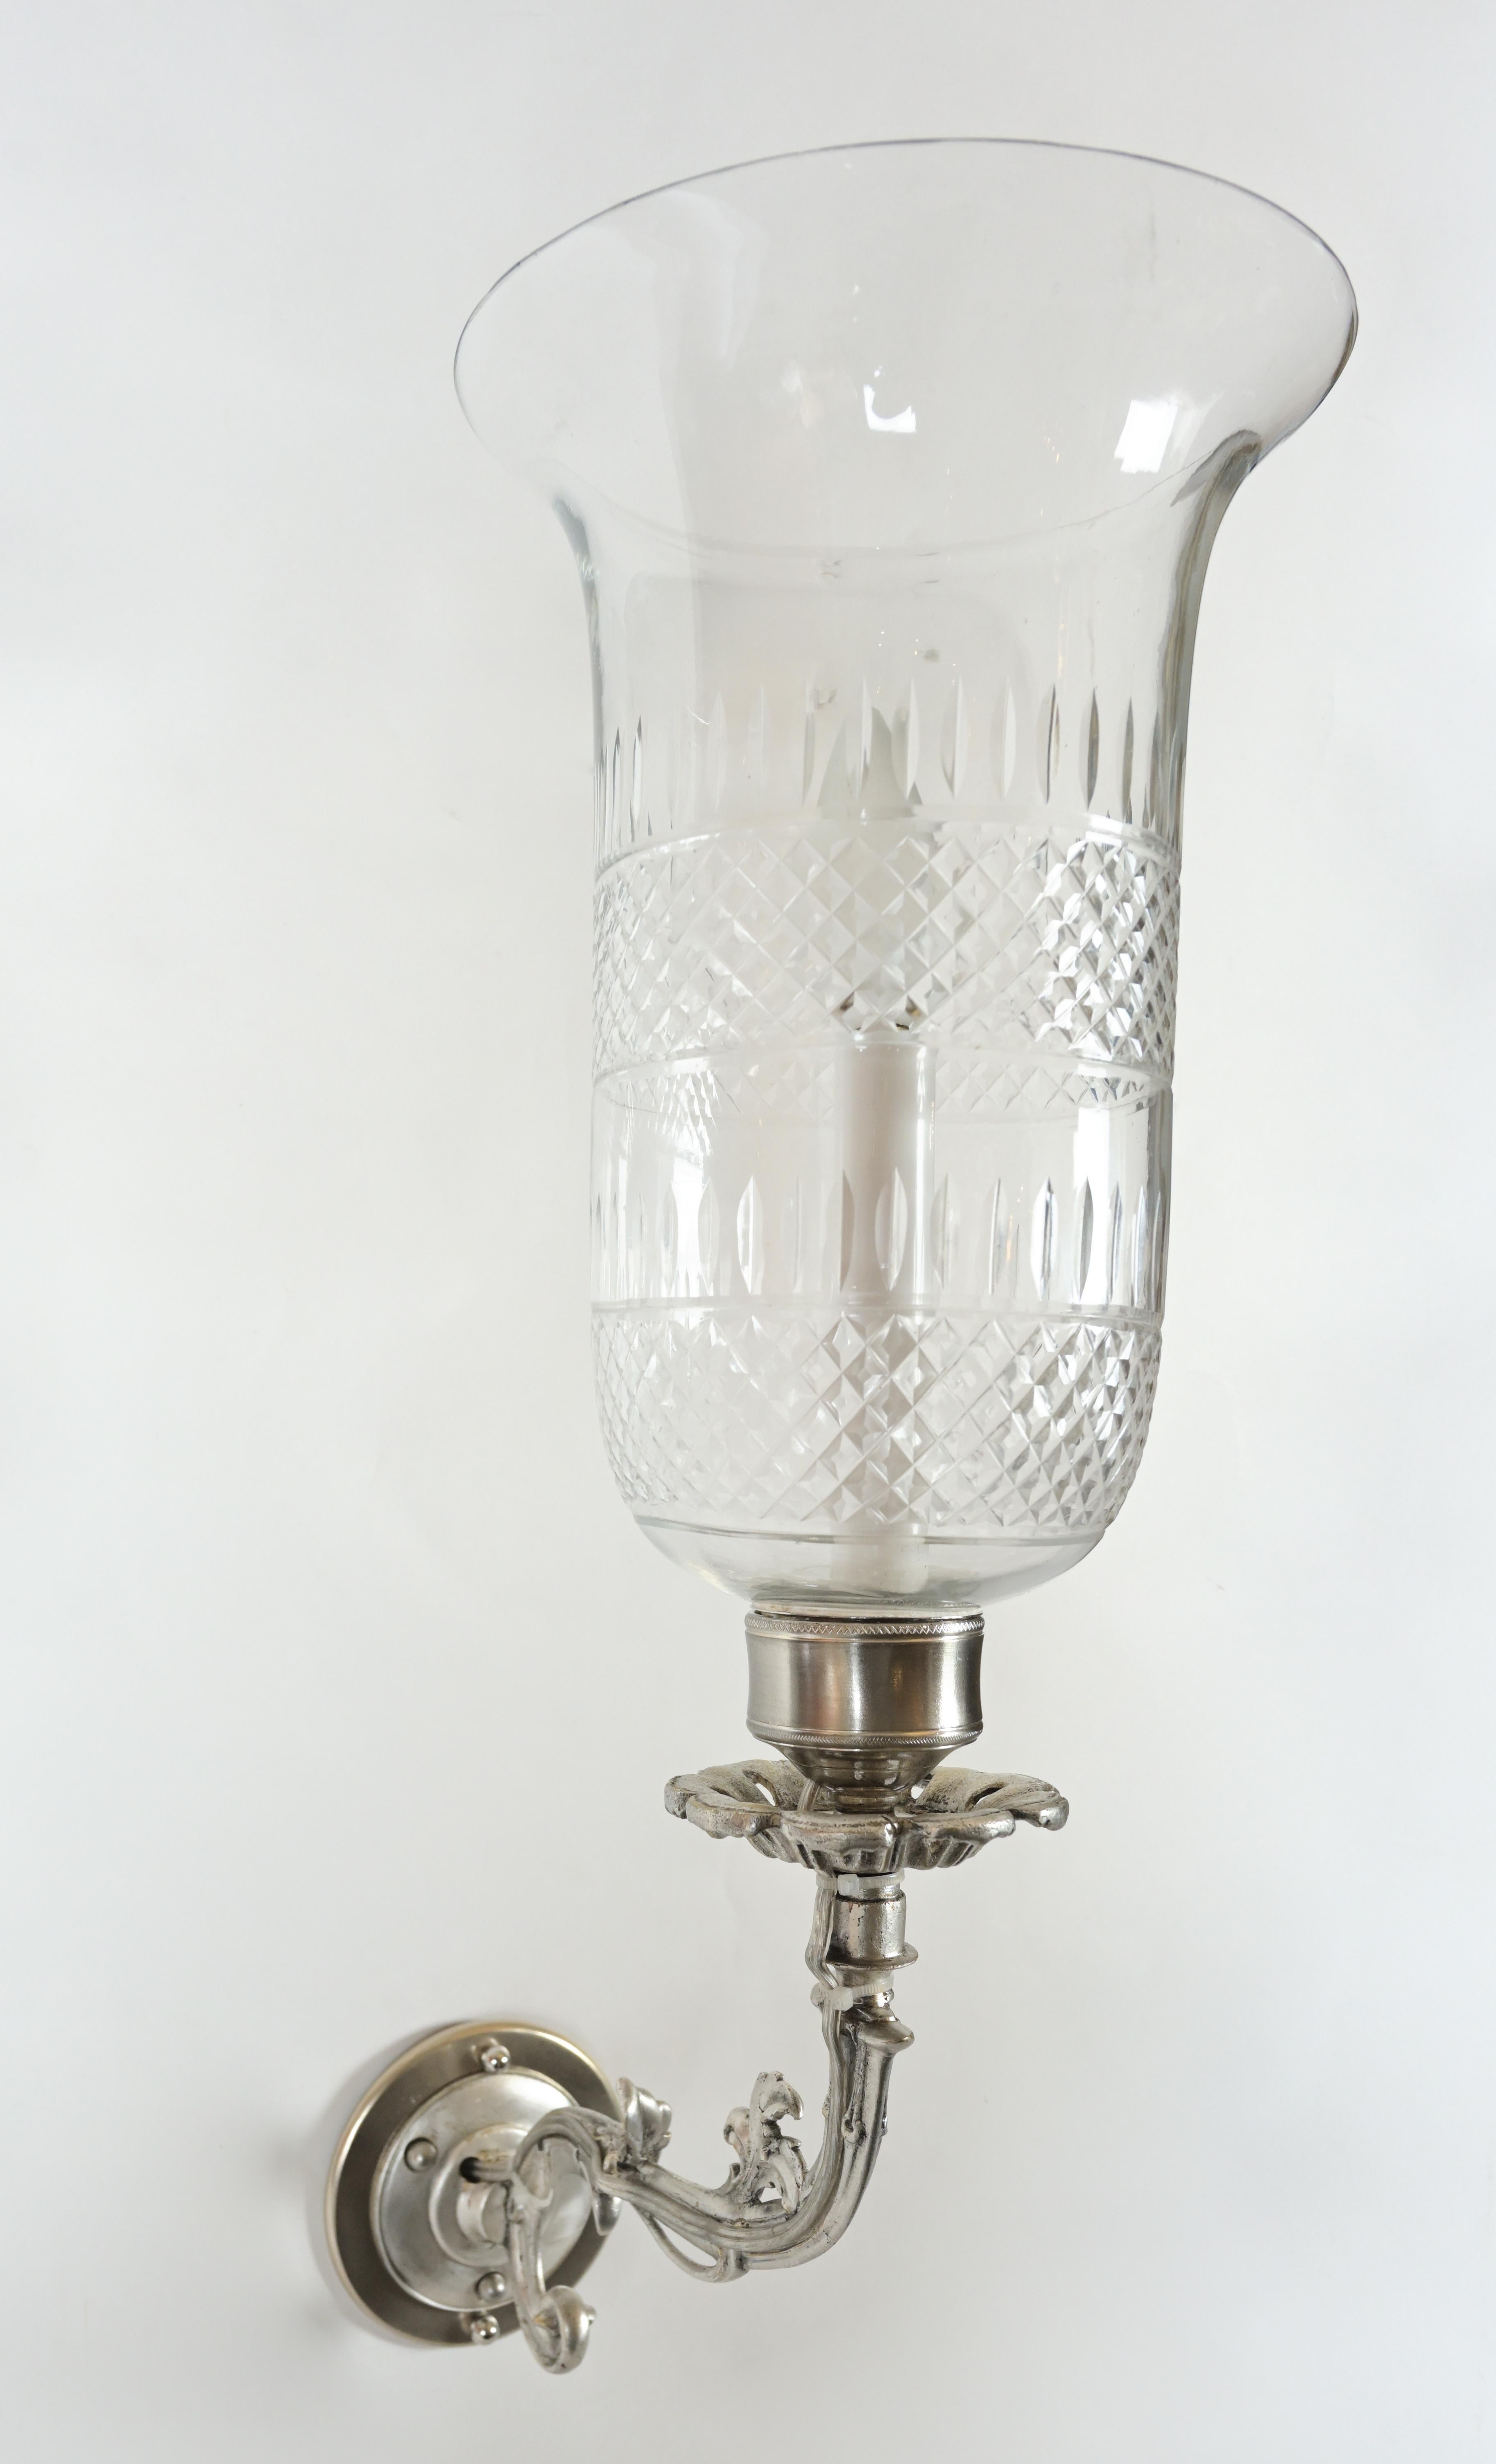 Rococo Revival Pair of 19th Century Antique Silver Sconces with Cut Crystal Hurricane Shades